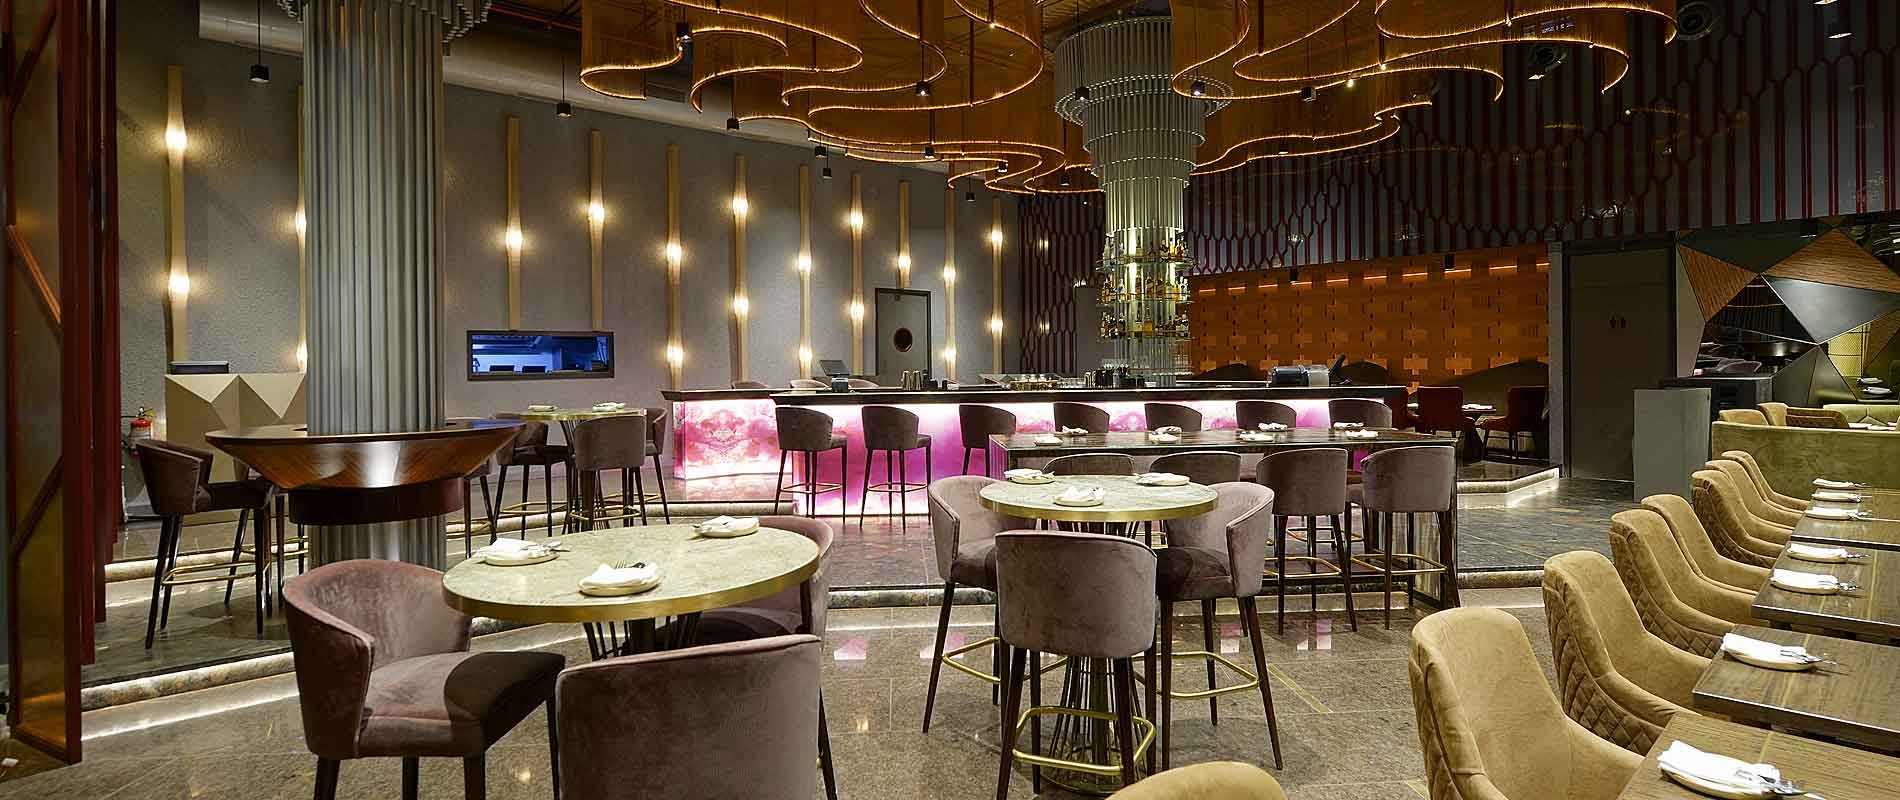 Modern Indian Bar and Restaurant Chain - Commercial Interior Design